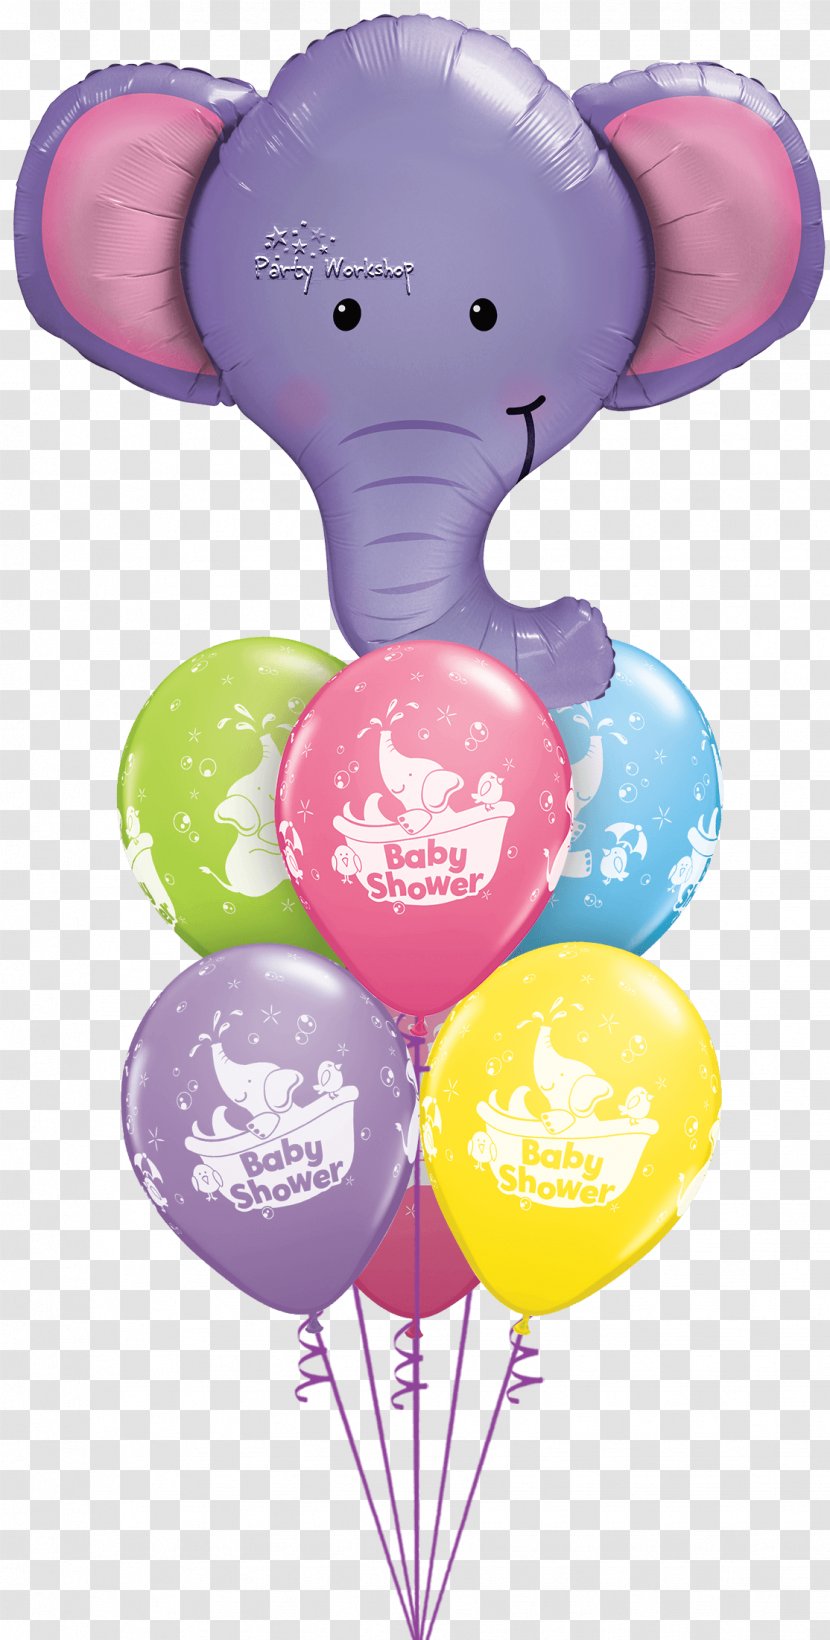 Toy Balloon Party Birthday Baby Shower - Wedding - Elephant Transparent PNG